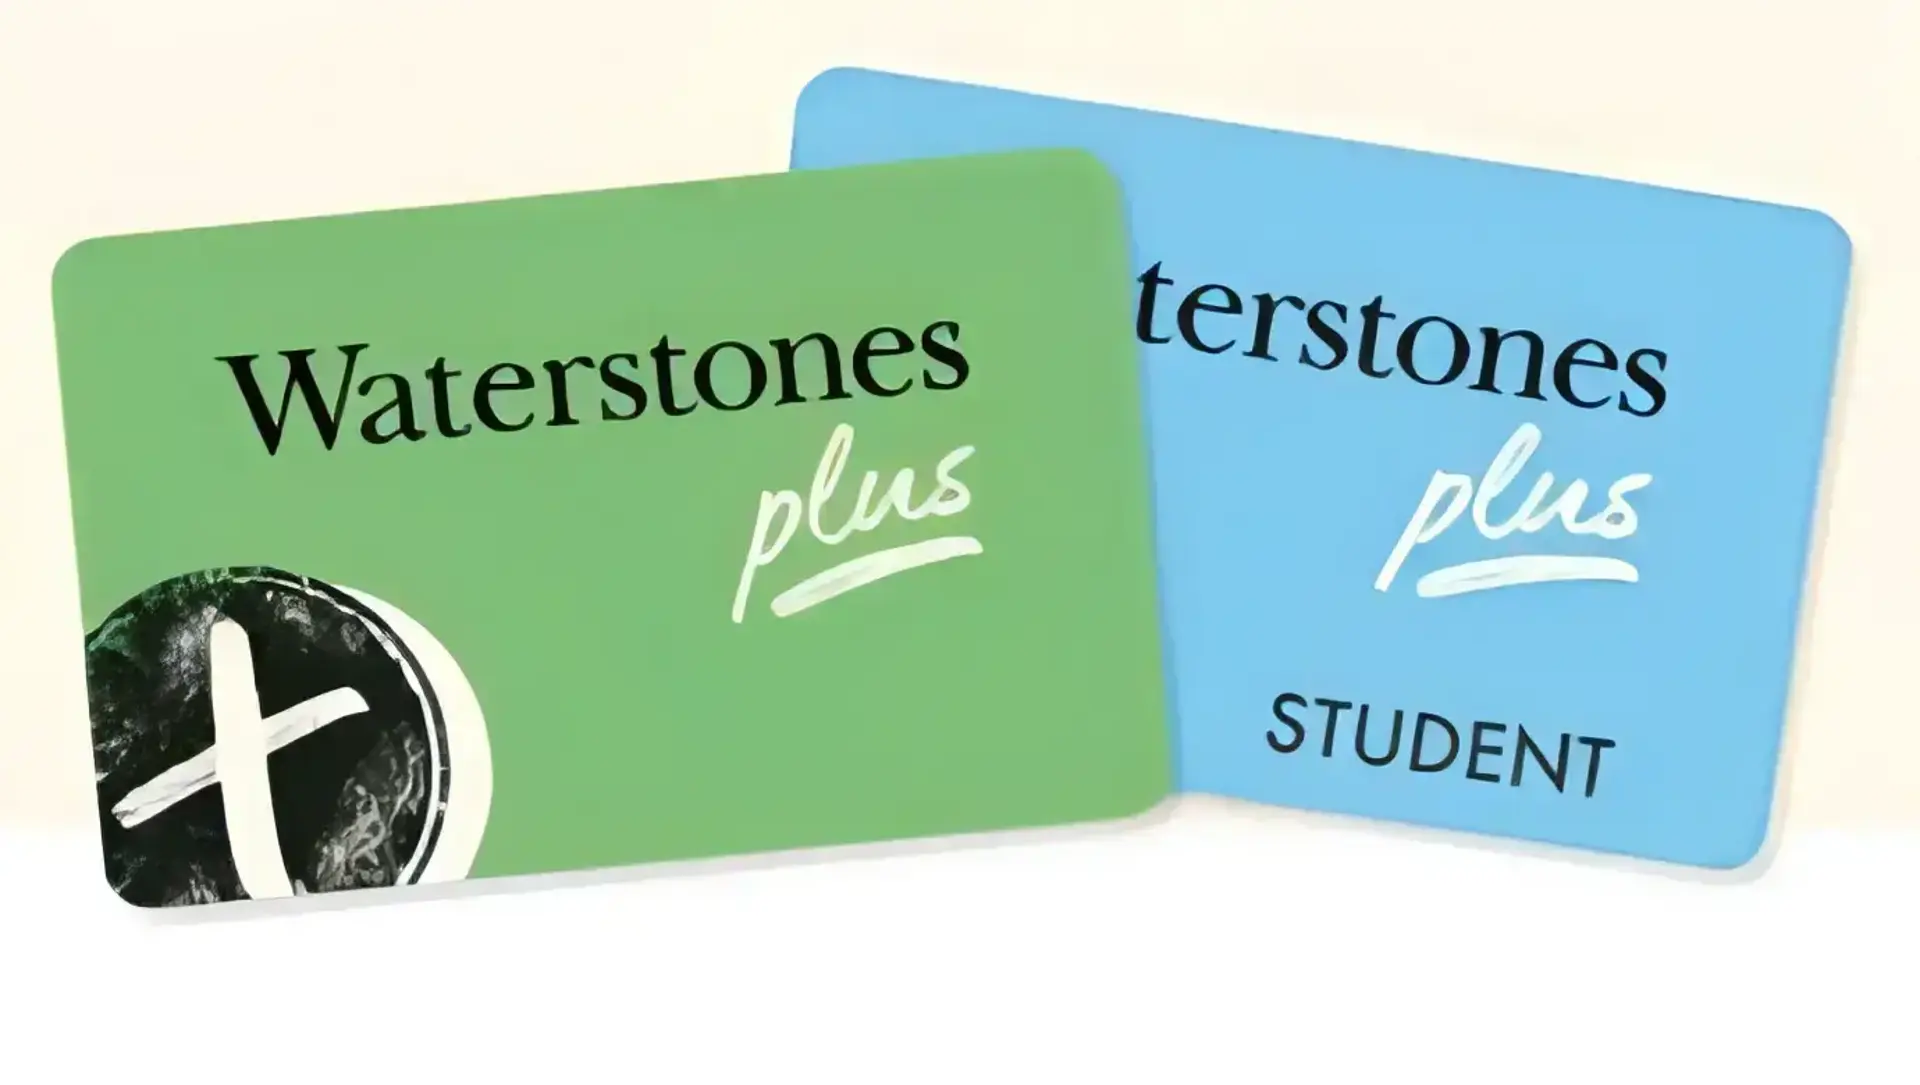  the Waterstones plus student card and regular card 